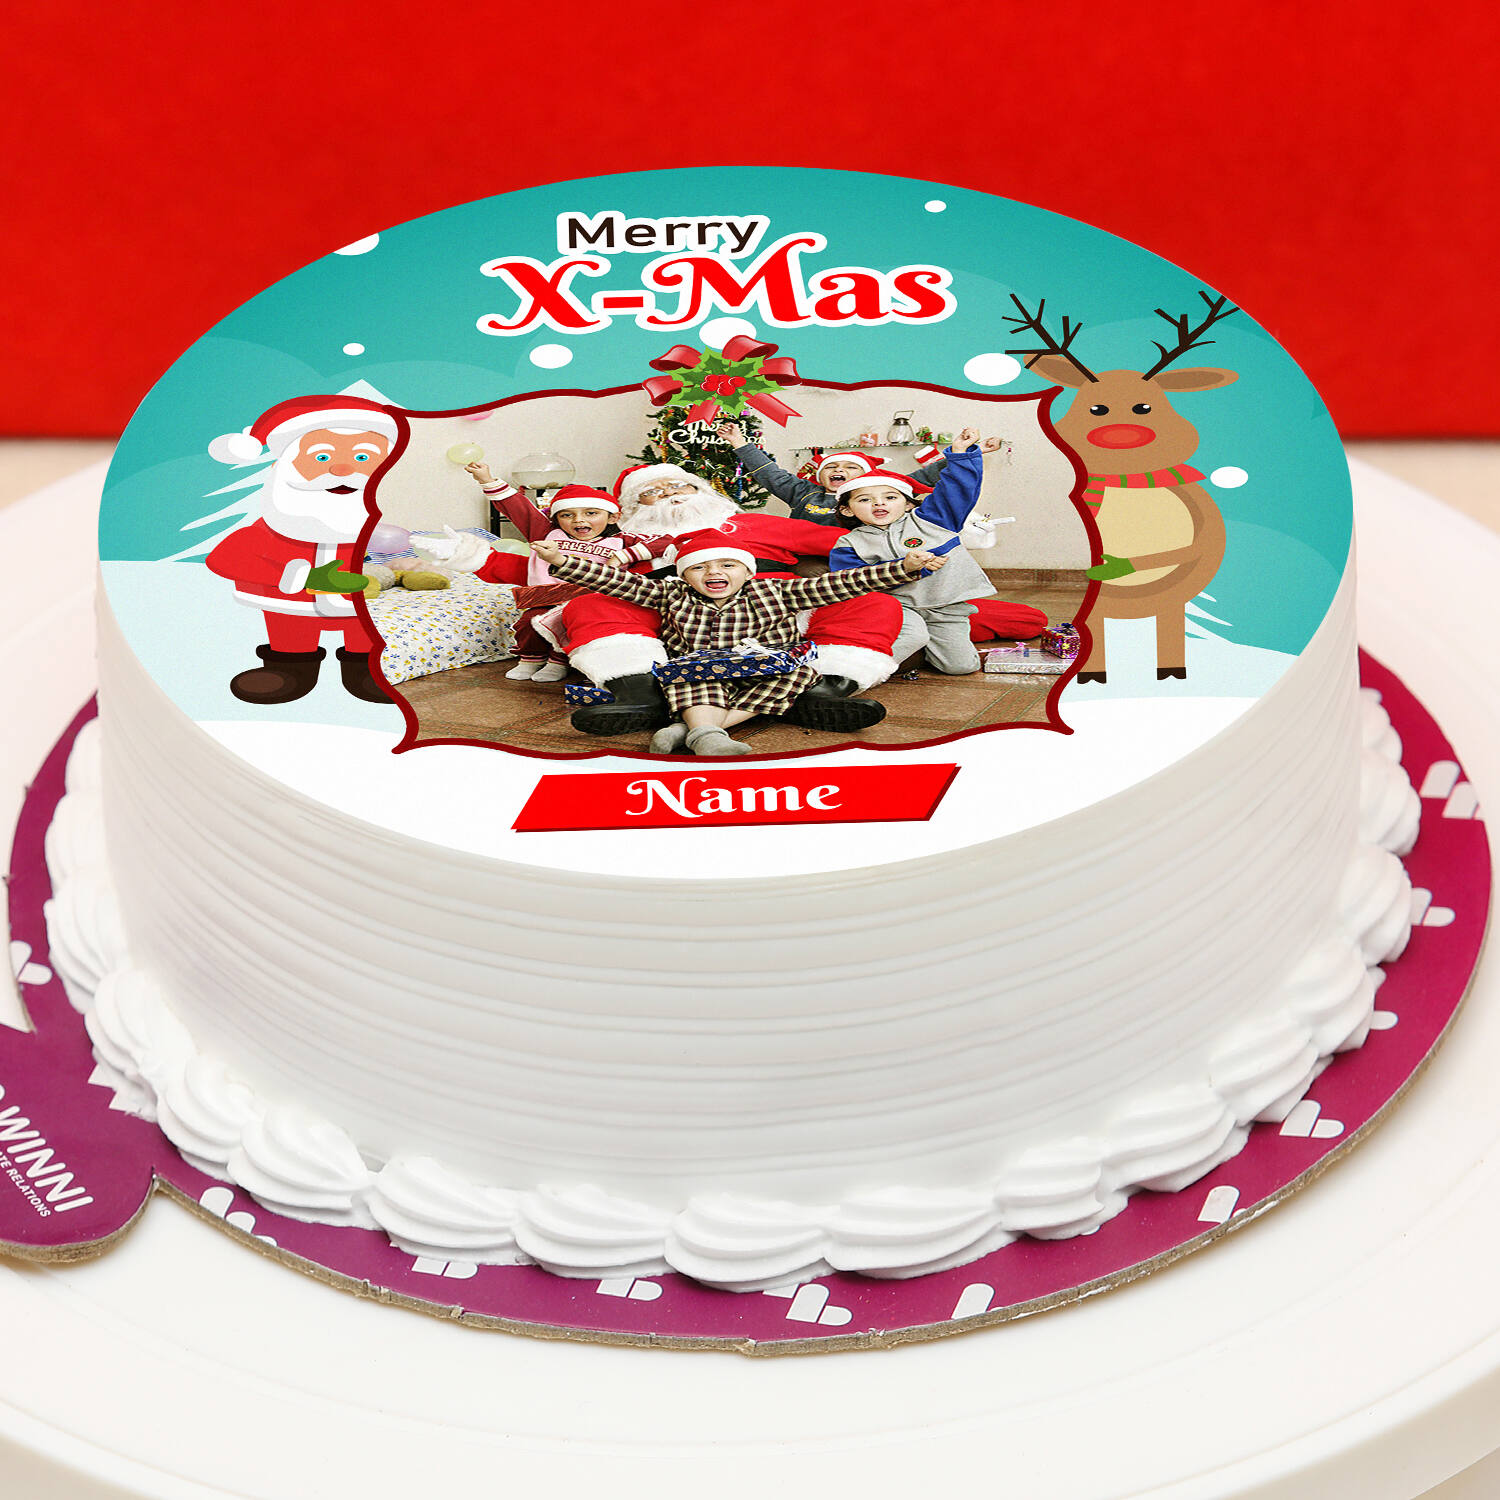 Merry Christmas Cakes @ OYC|Santa cakes and many more Christmas cakes online